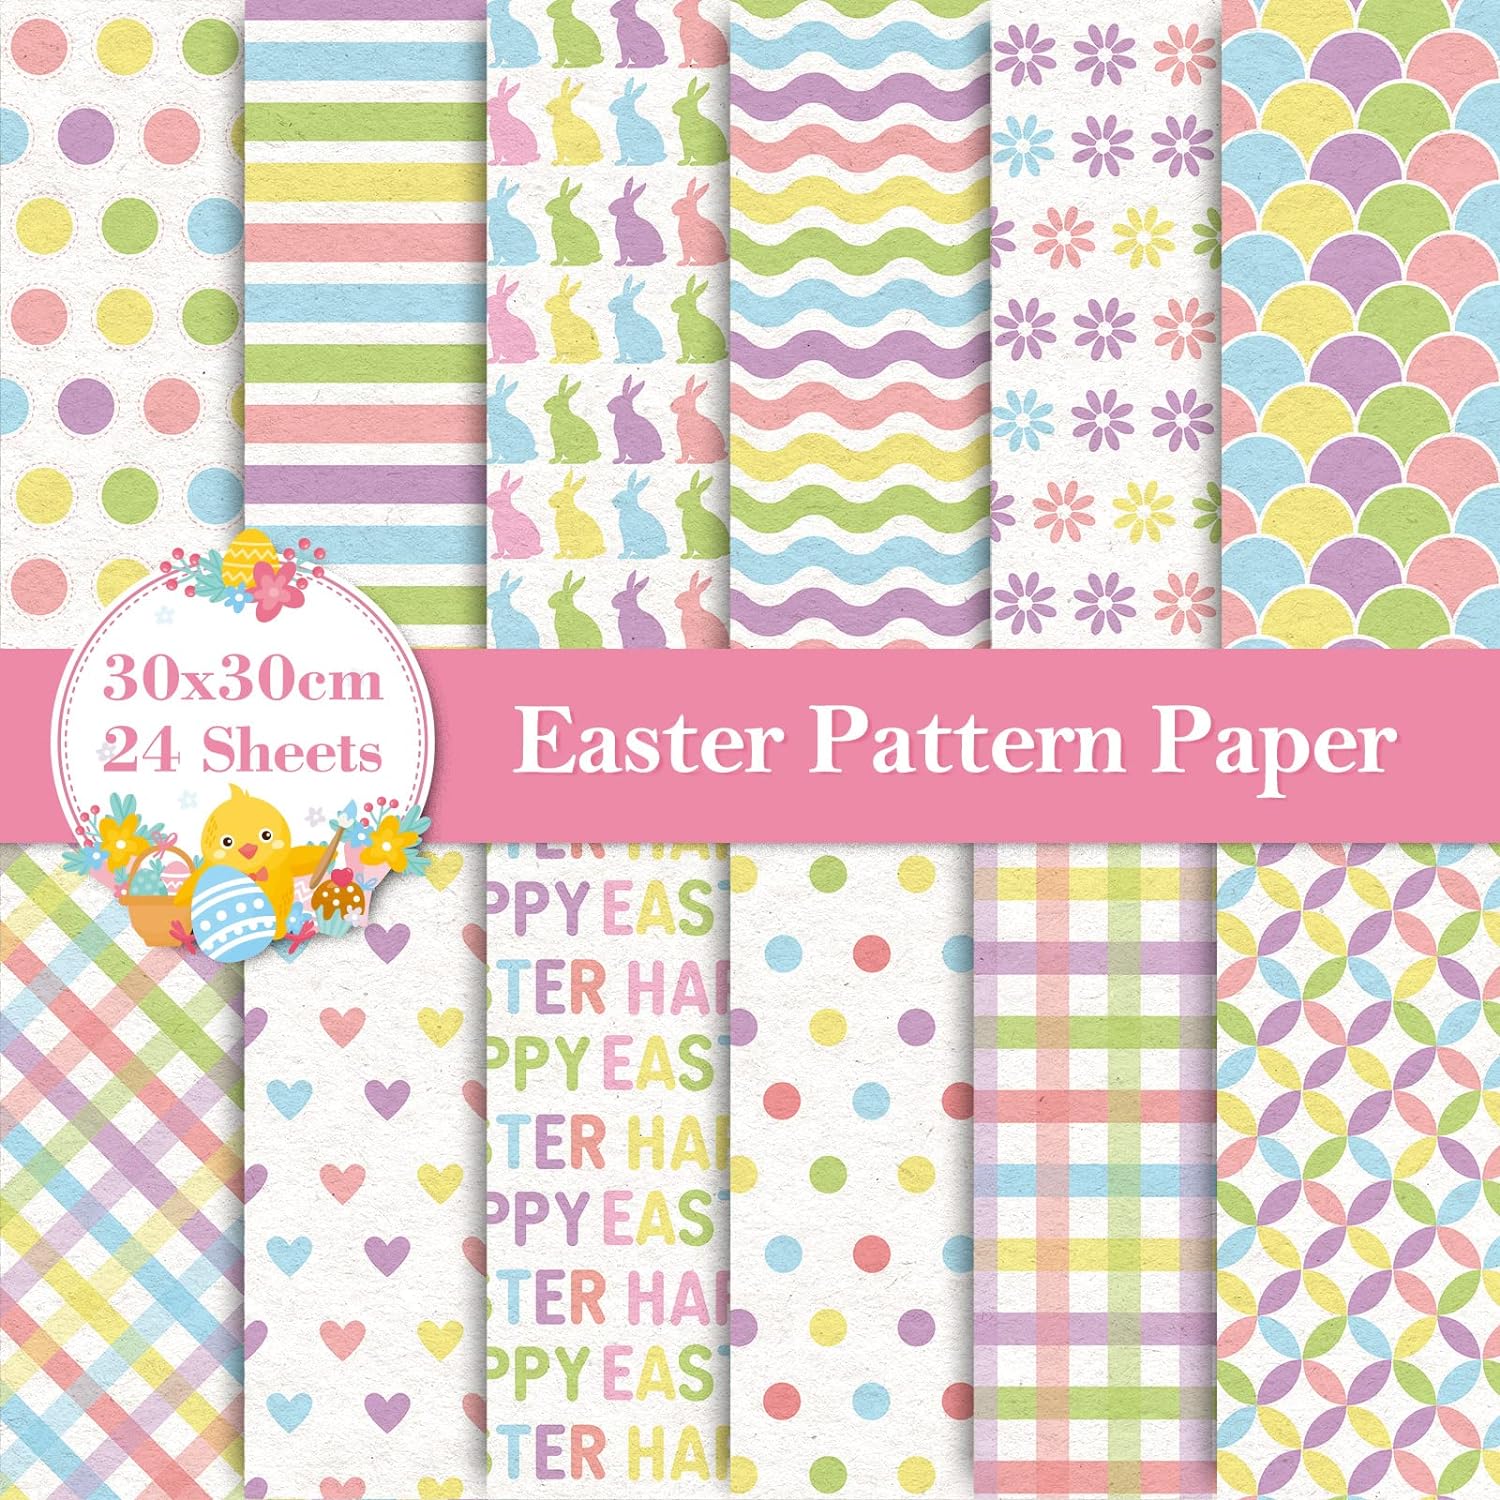 Whaline 12 Designs Easter Pattern Paper 24 Sheet Happy Easter Pastel Scrapbook Paper Double-Sided Spring Decorative Craft Paper Folded Flat for Card Making Scrapbook Photo Album Decor, 30 x 30cm